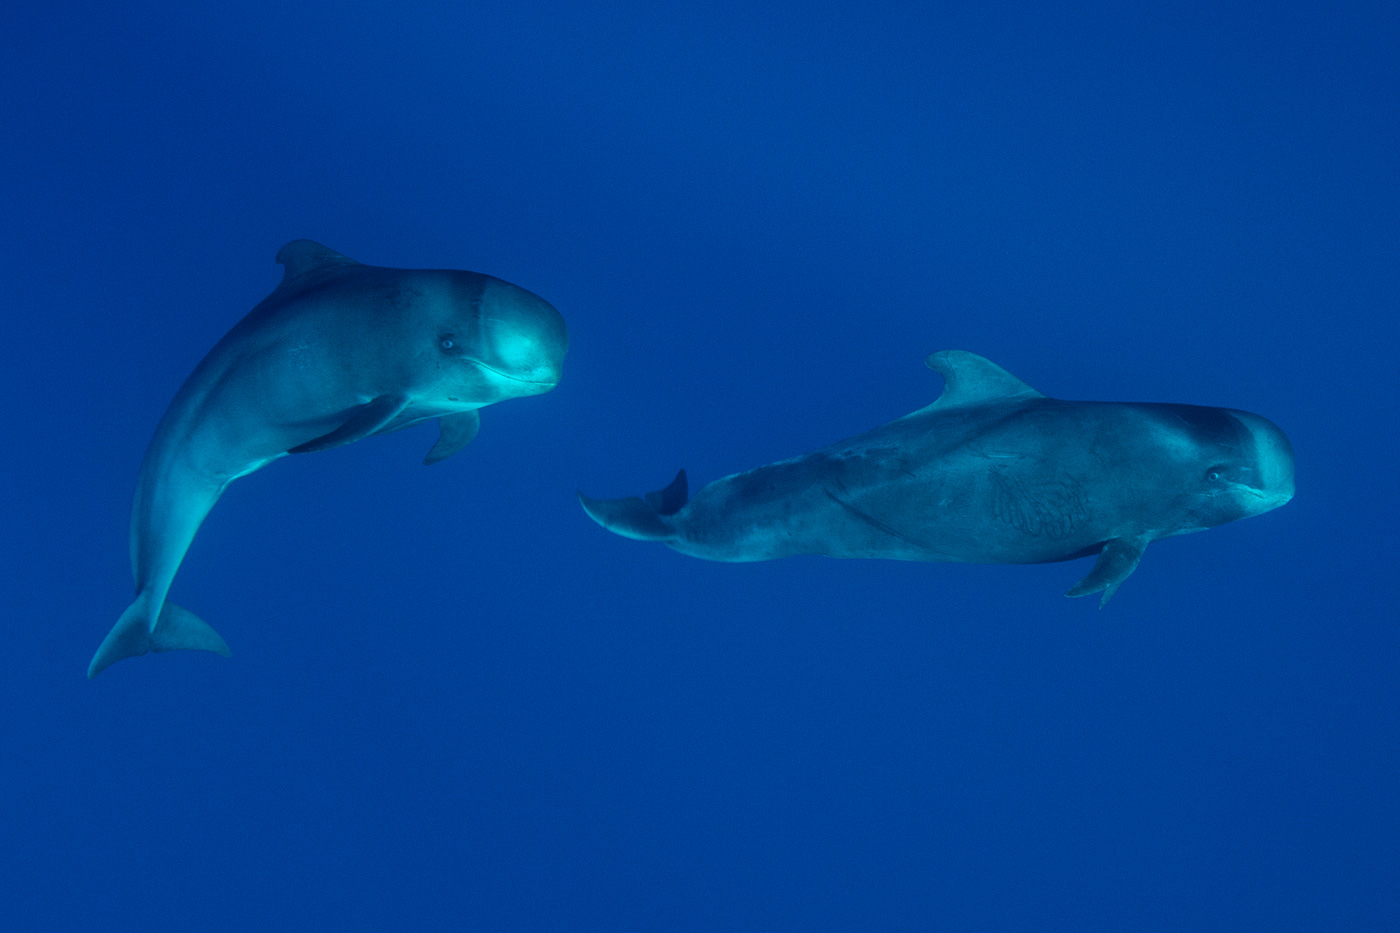 two baby pilot whales azores